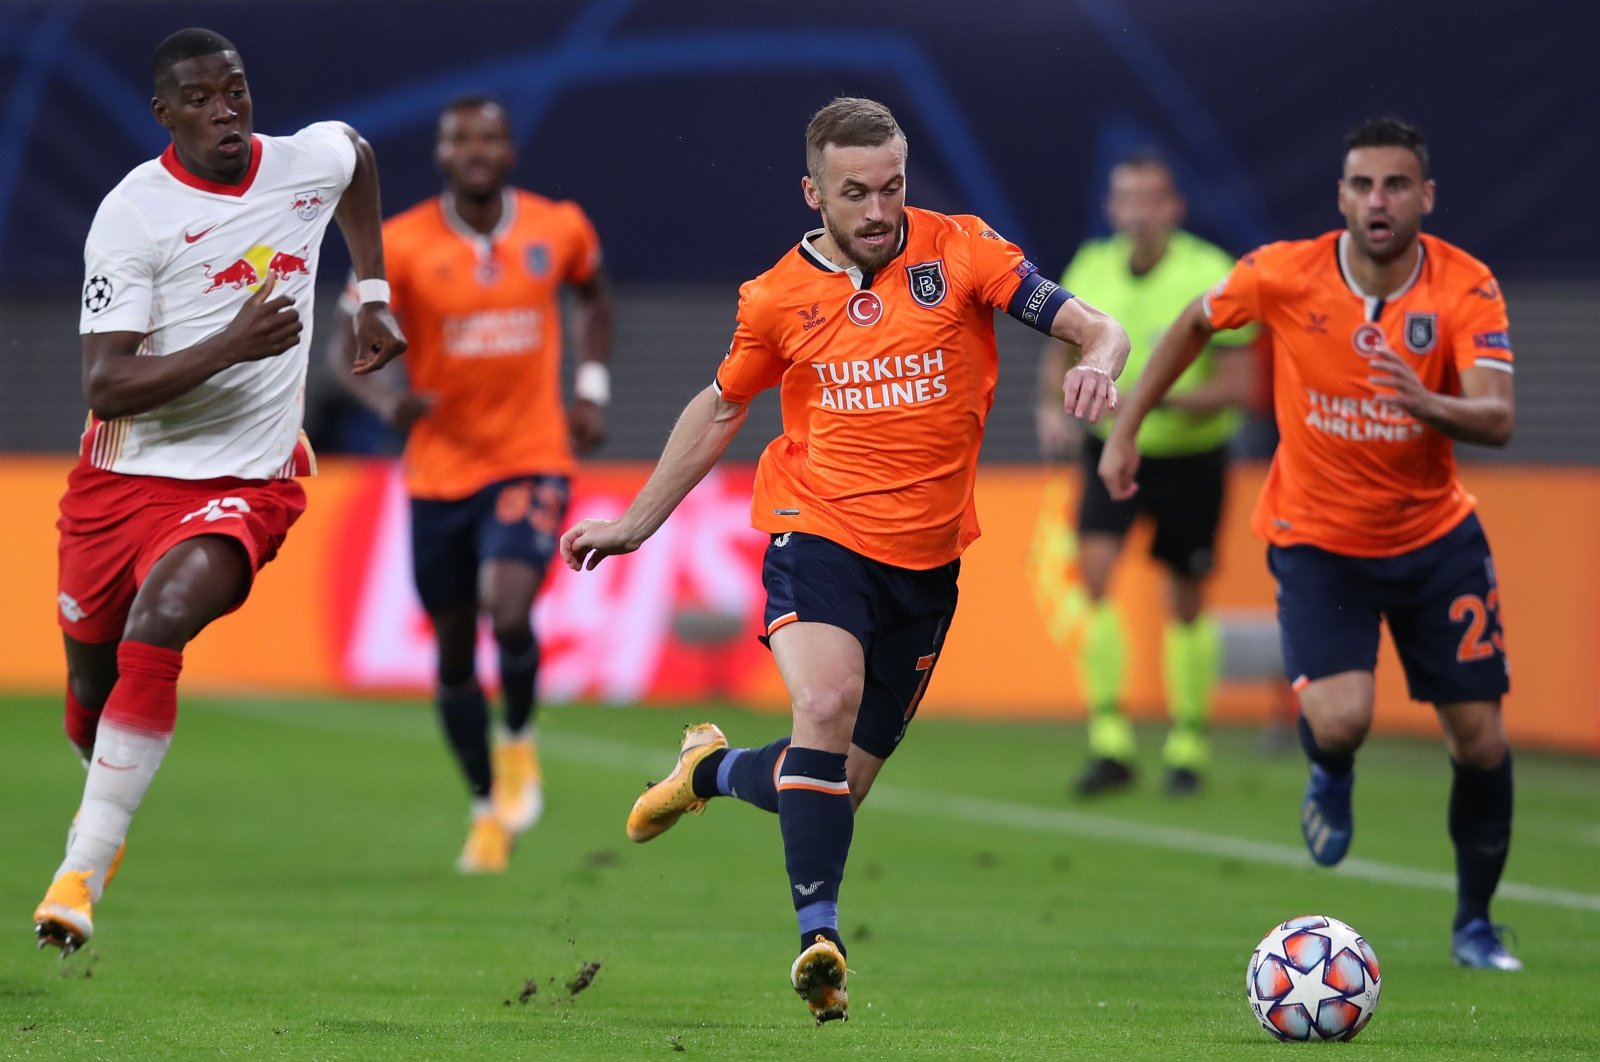 Istanbul Başakşehir's Bosnian midfielder Edin Visca (C) gets past Leipzig's French defender Nordi Mukiele (L) with the ball during a Group H Champions League football match between RB Leipzig and Istanbul Başakşehir at the RB Arena in Leipzig, Germany, Oct. 20, 2020. (AFP Photo)